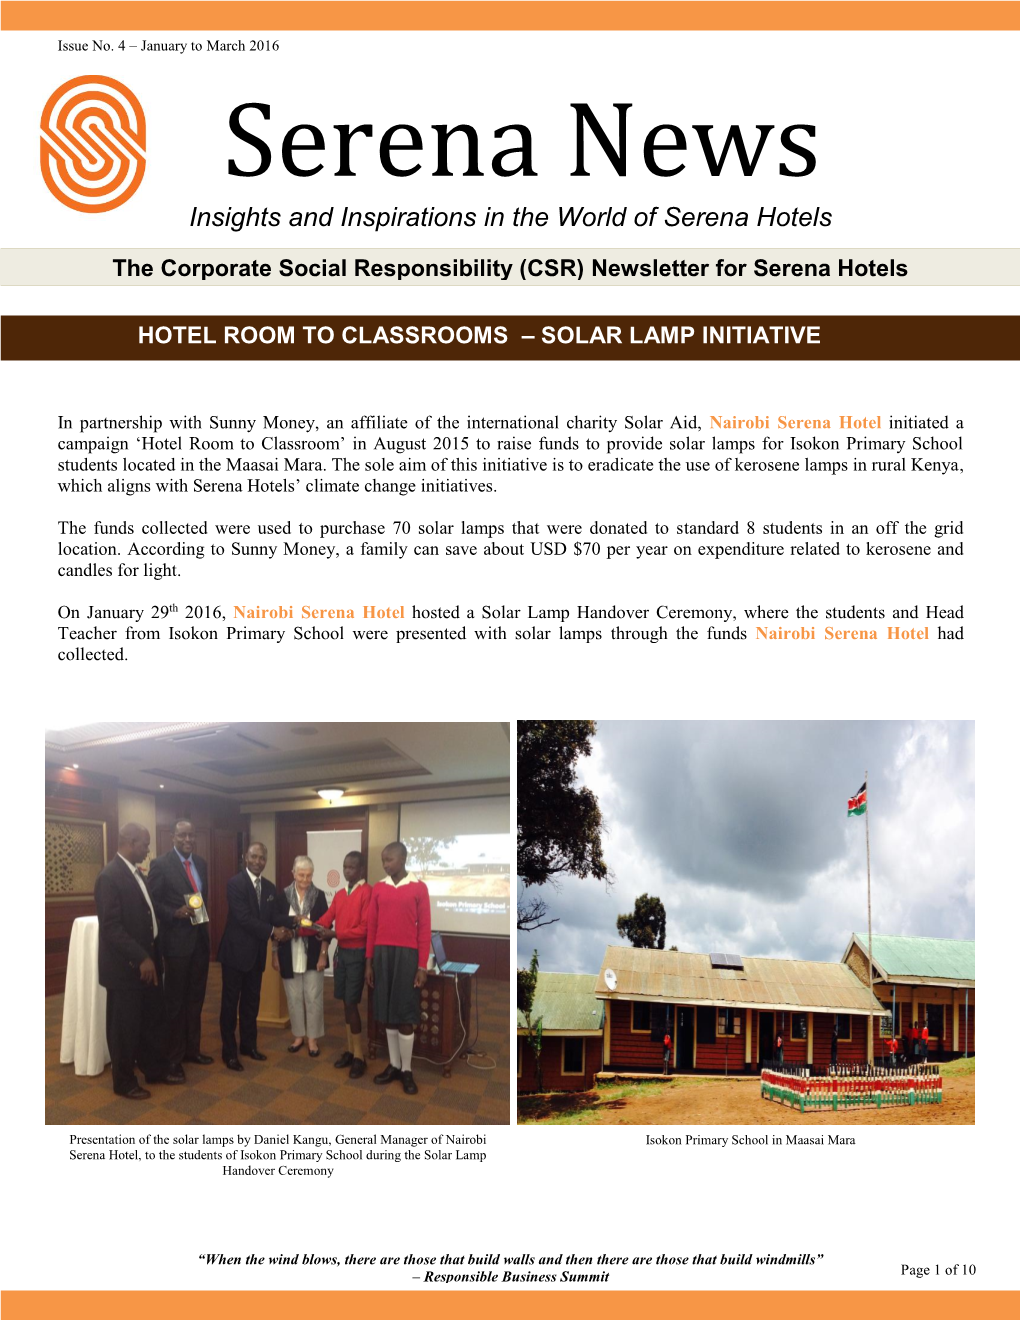 Serena News Insights and Inspirations in the World of Serena Hotels